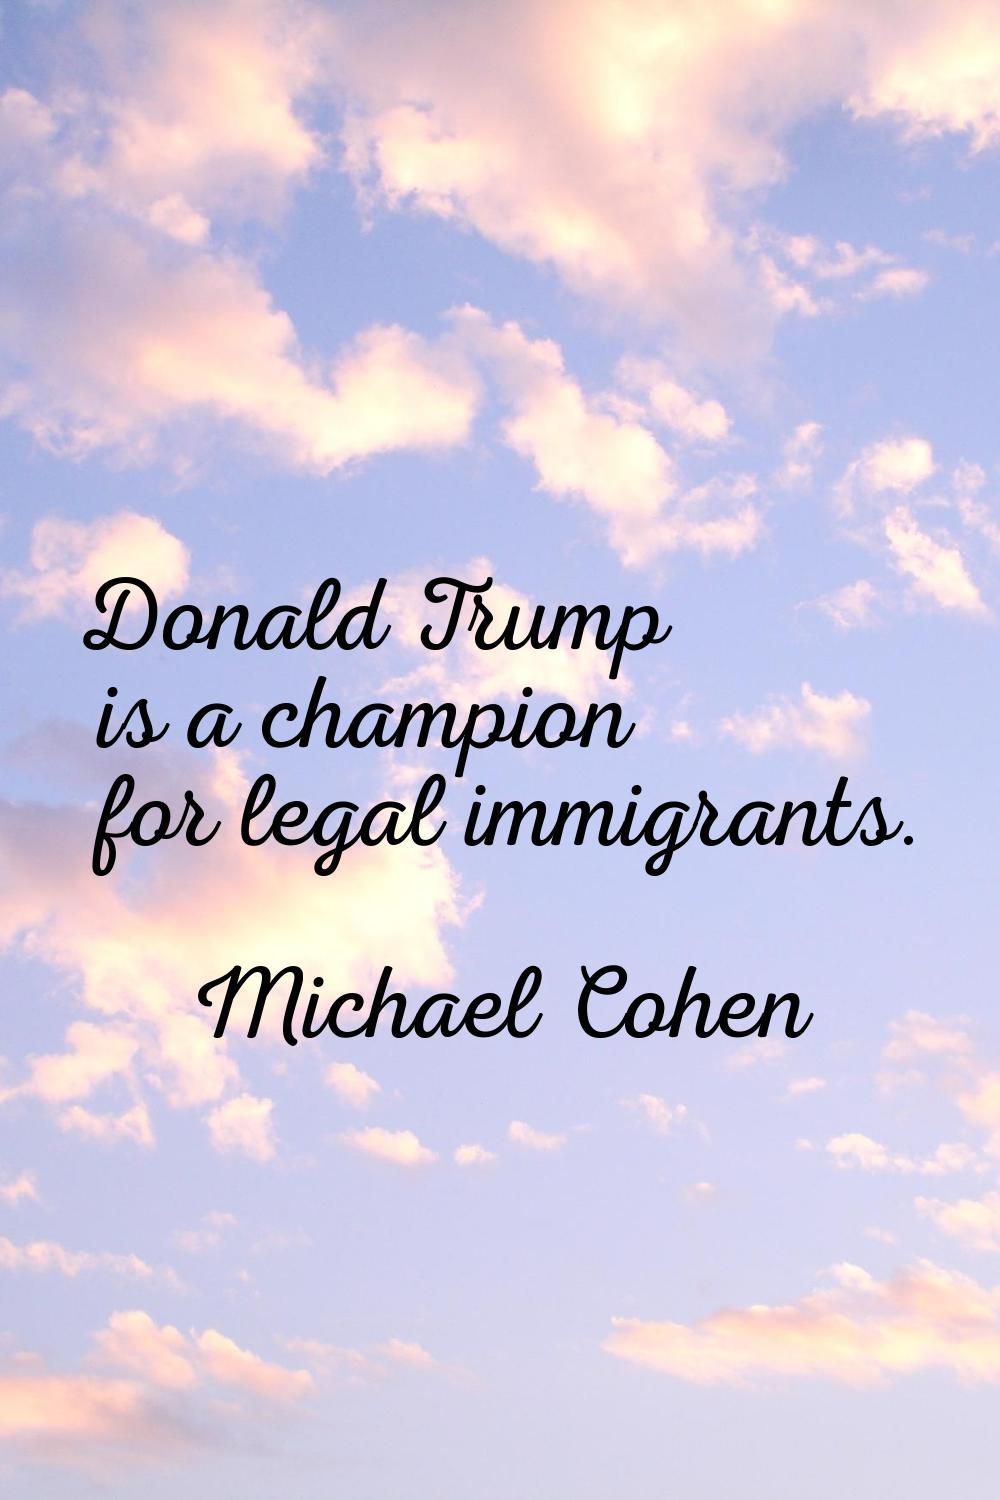 Donald Trump is a champion for legal immigrants.